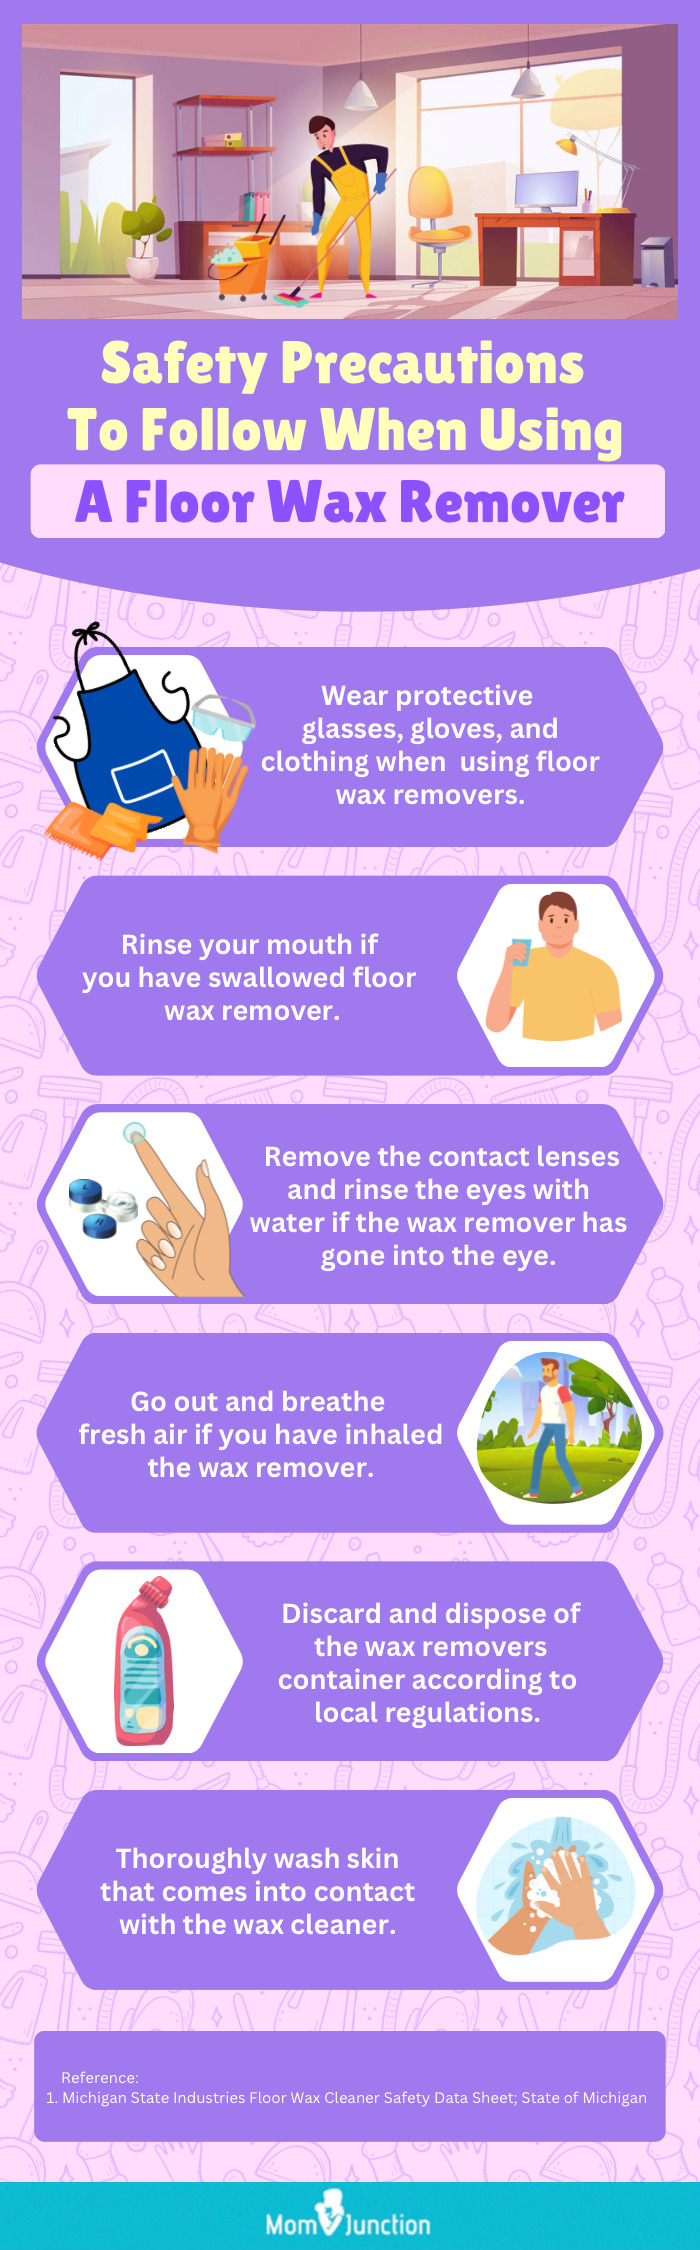 Safety Precautions To Follow When Using A Floor Wax Remover (Infographic)